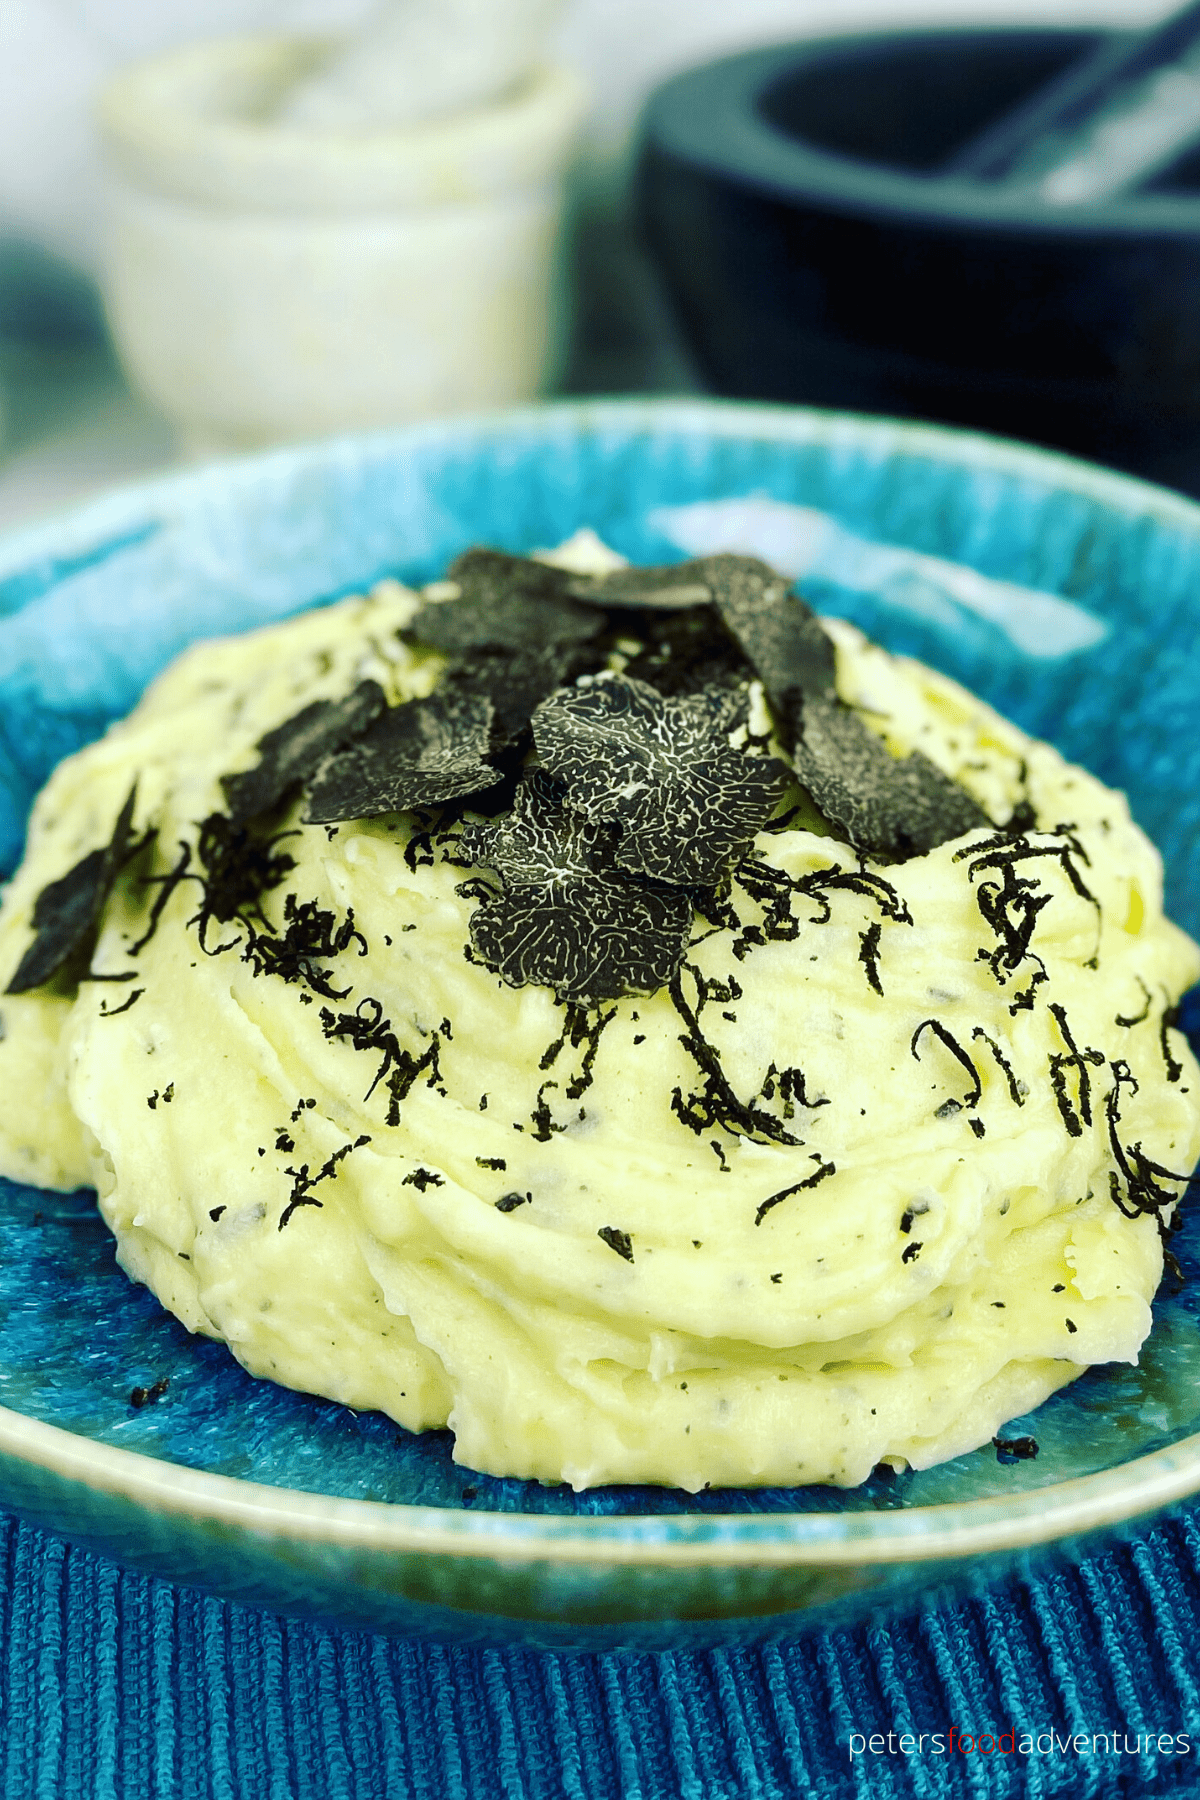 The ultimate decadent side dish recipe! Truffle Mashed Potatoes will be the talk of your holiday table. Rich and creamy, you'll love the earthy and nutty flavors of Truffle Mash!